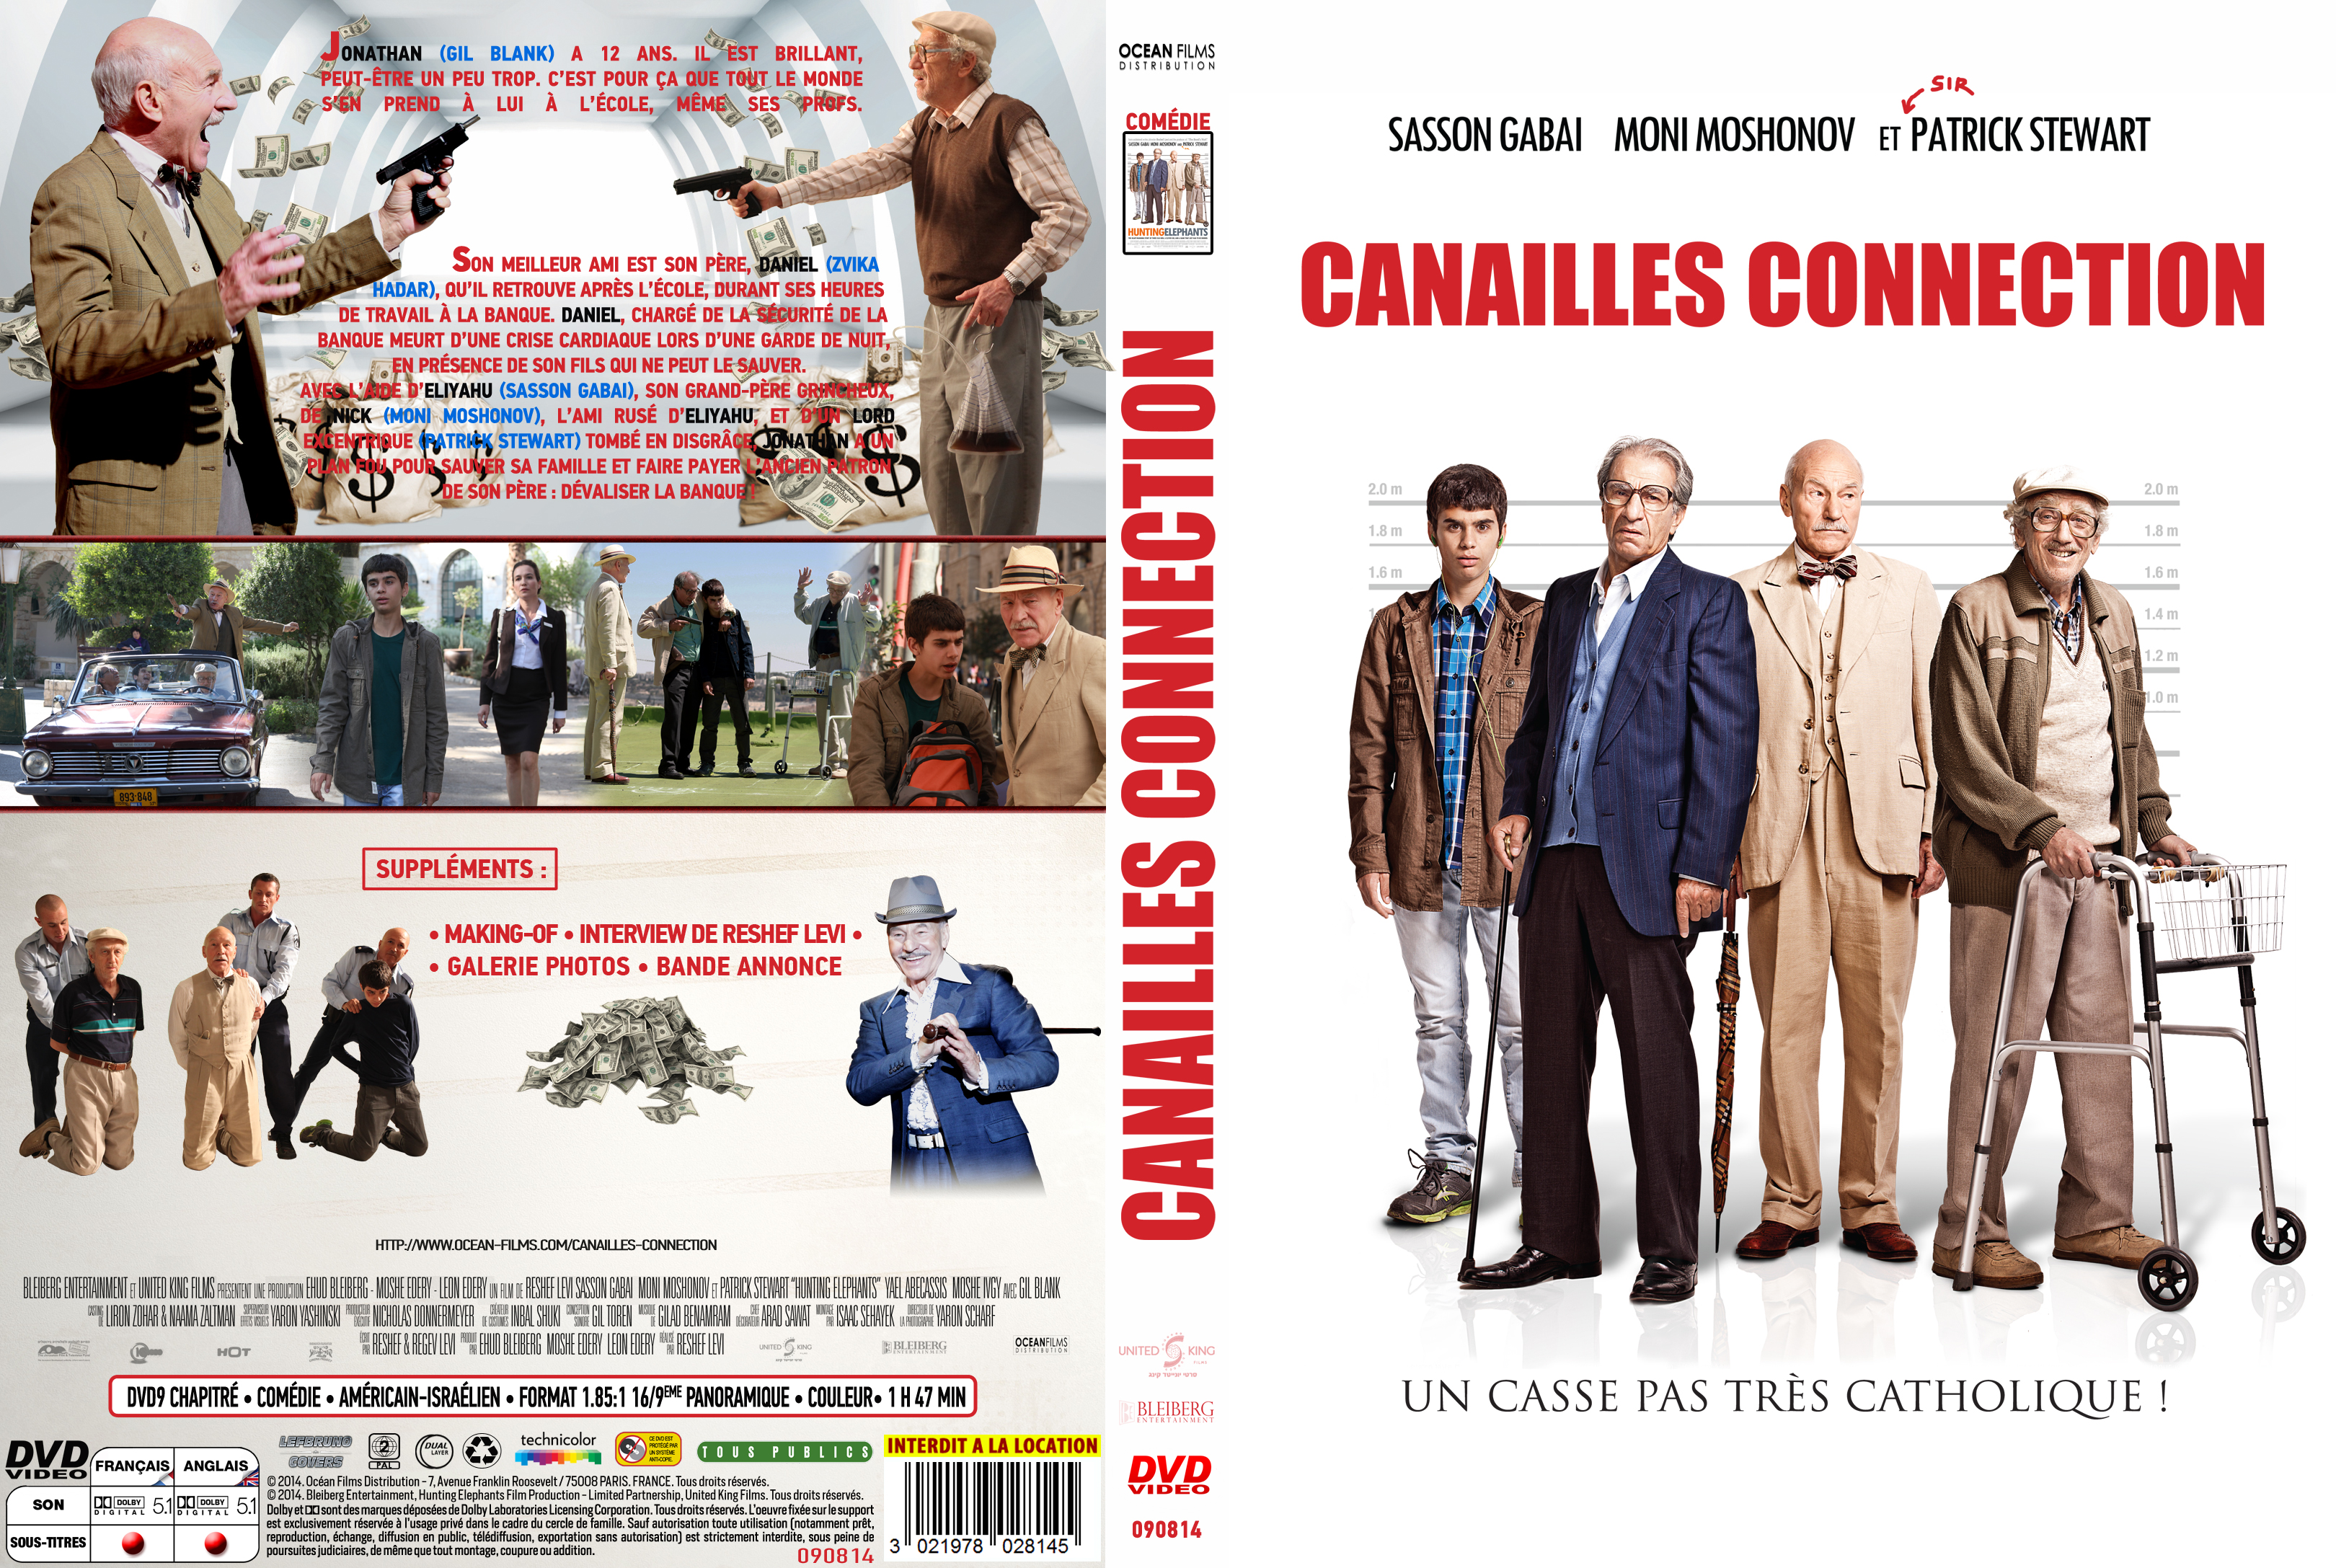 Jaquette DVD Canailles Connection custom